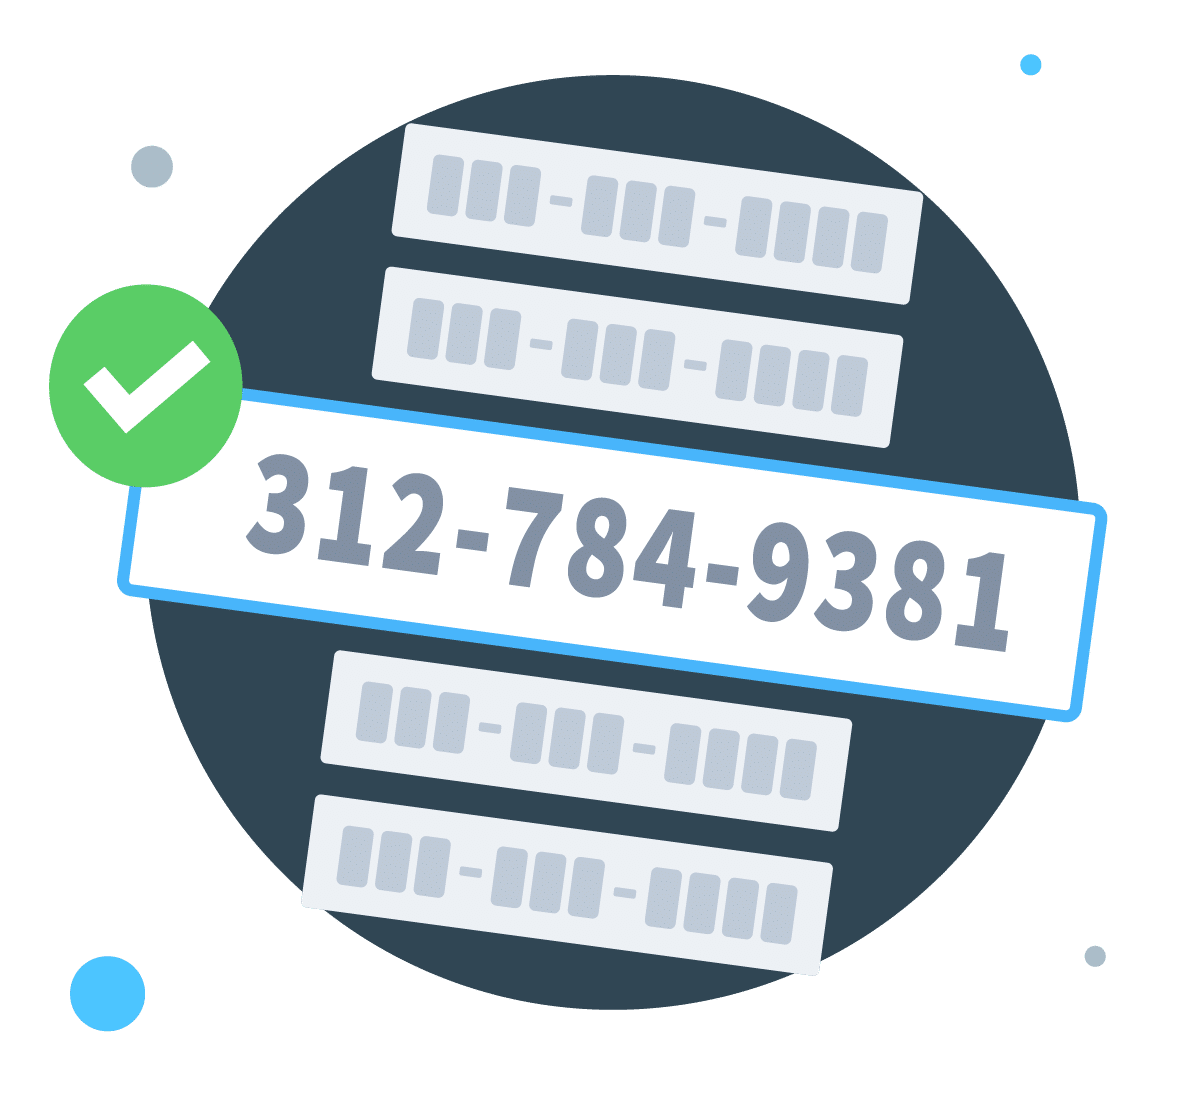 How to Get a Business Number on Your Cell Phone